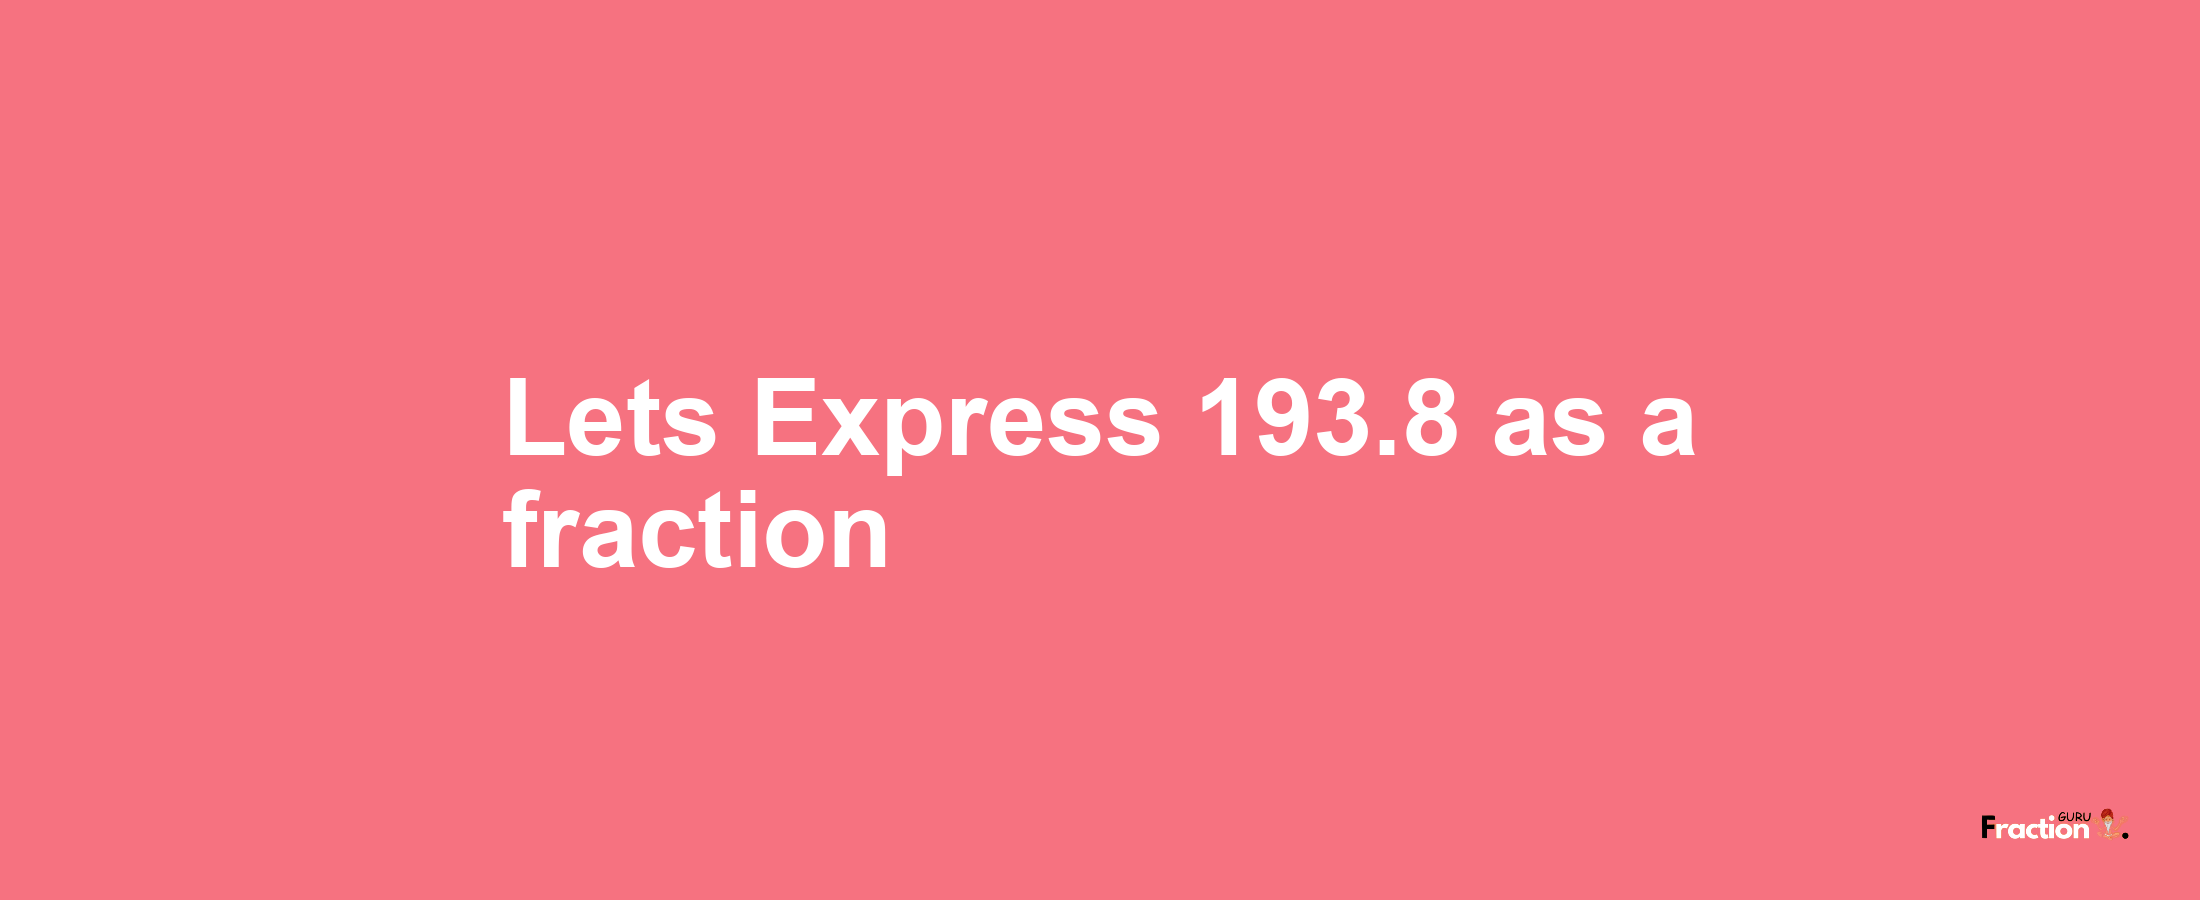 Lets Express 193.8 as afraction